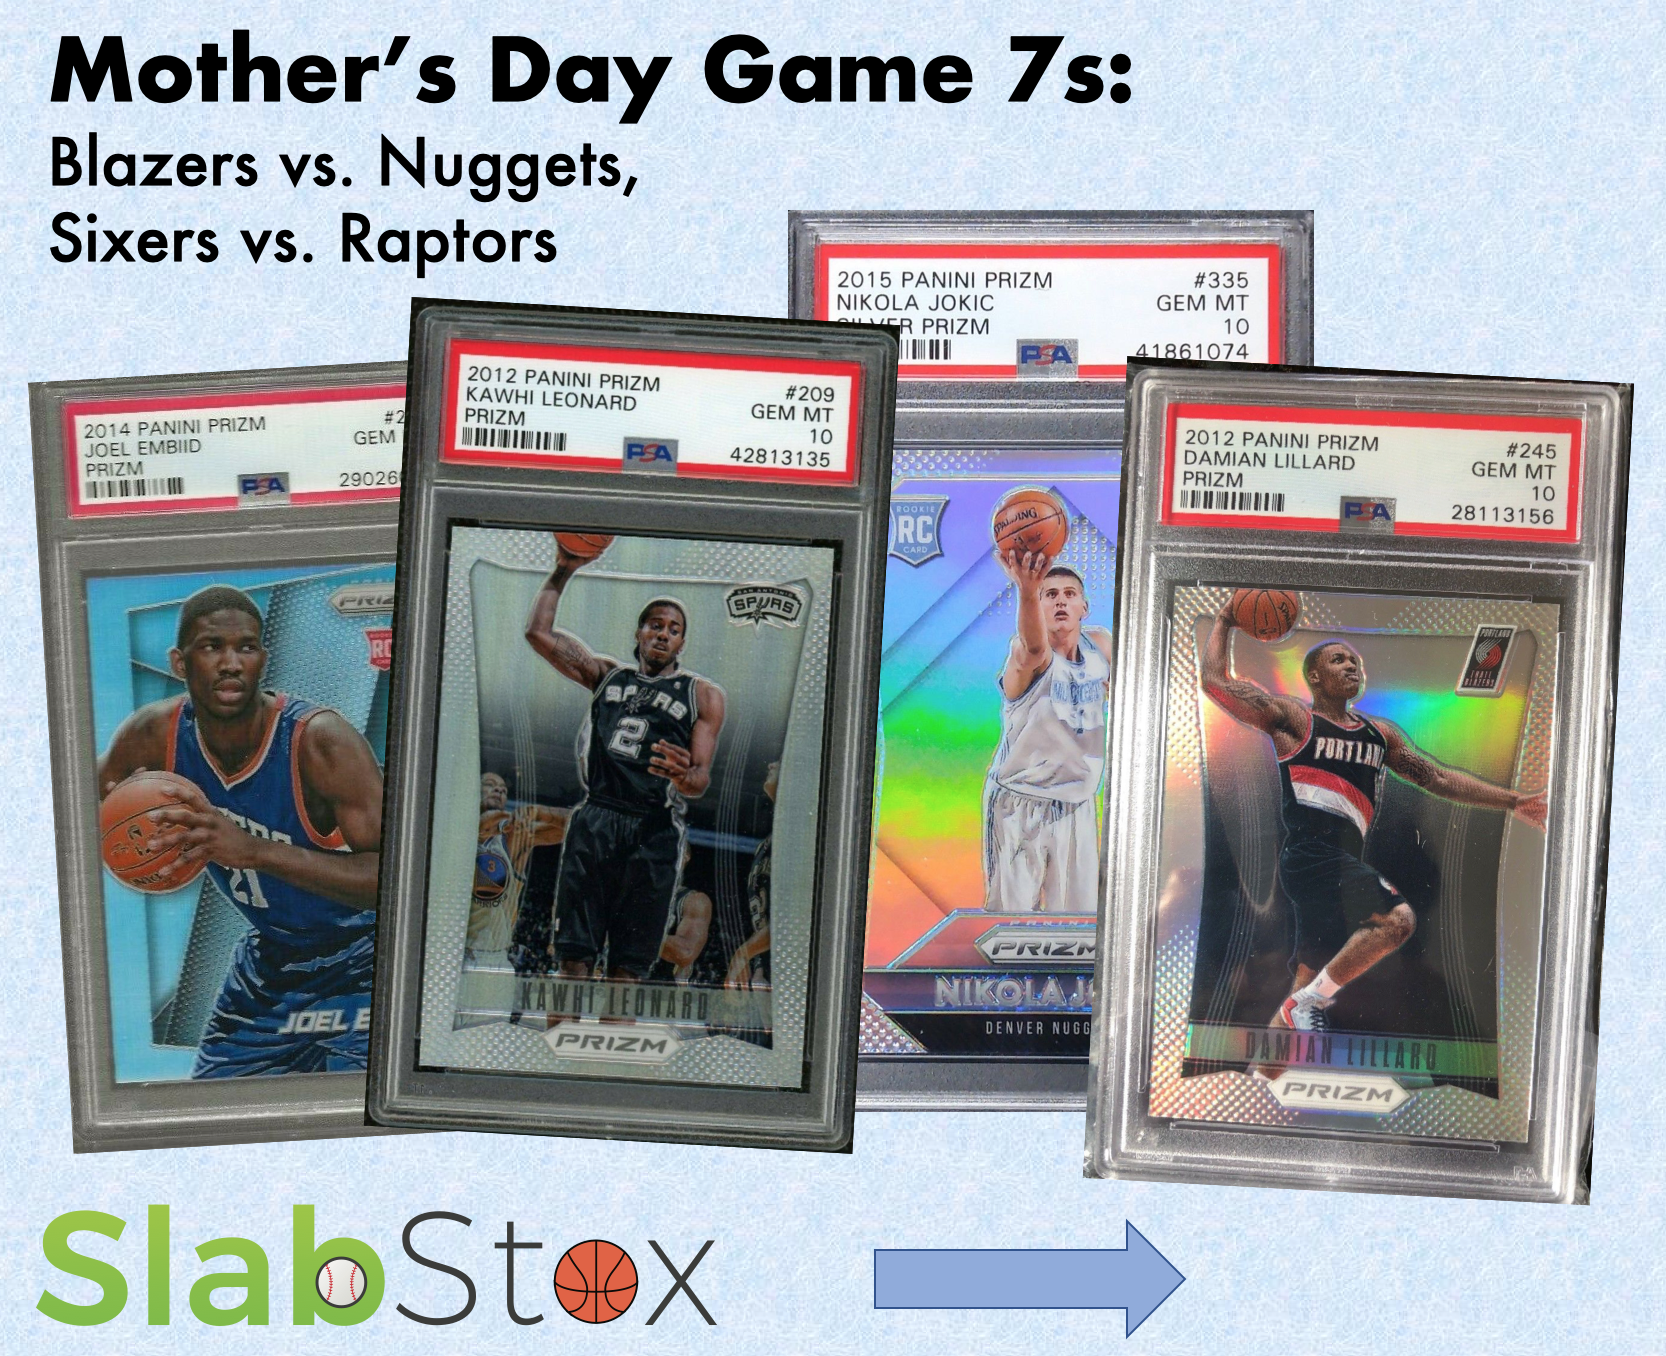 SlabStox graphic for Mothers' Day Game 7s: Blazers vs. Nuggets and Sixers vs. Raptors